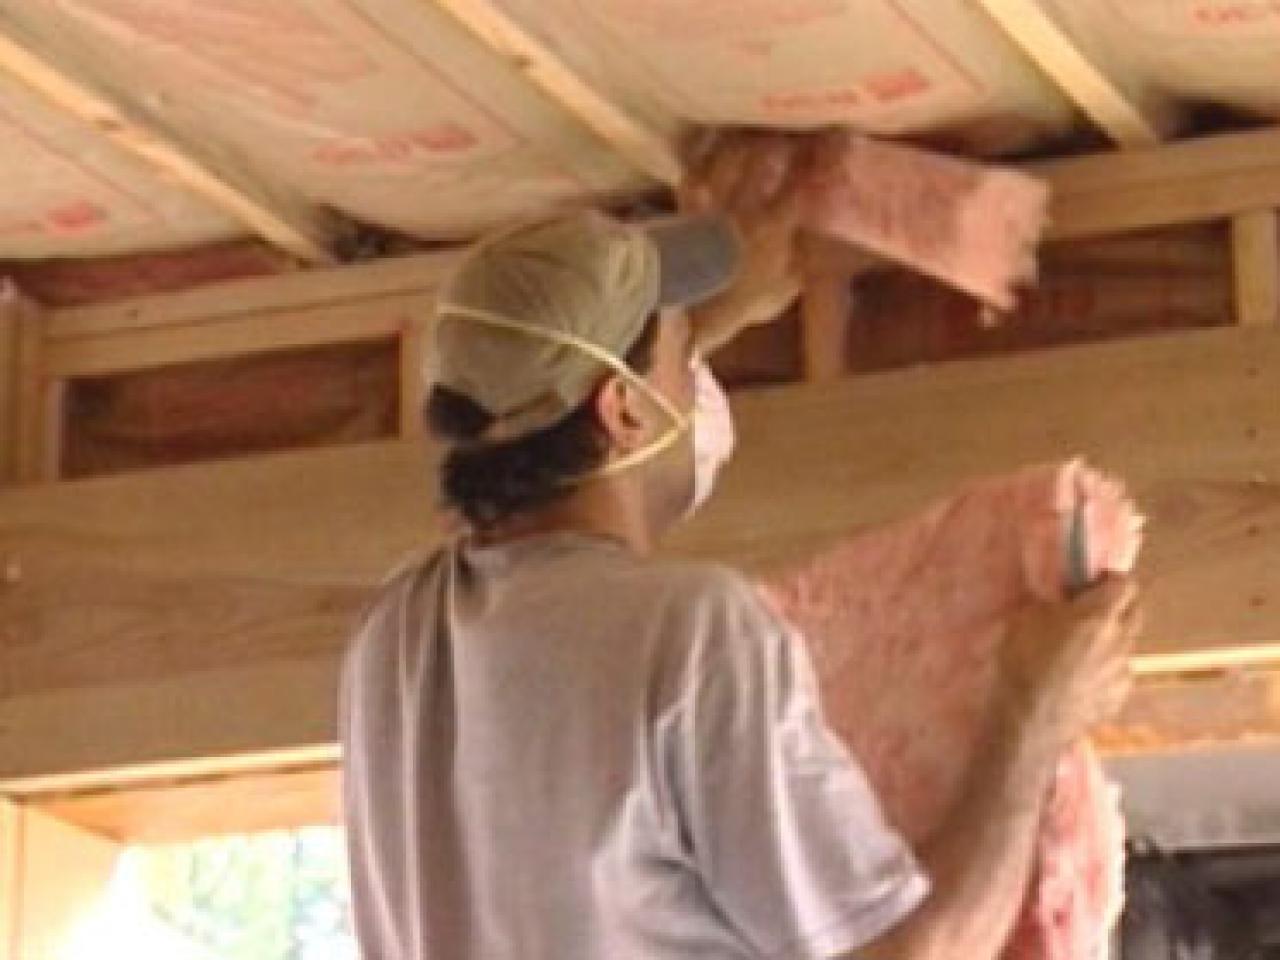 What are some tips for installing attic insulation?